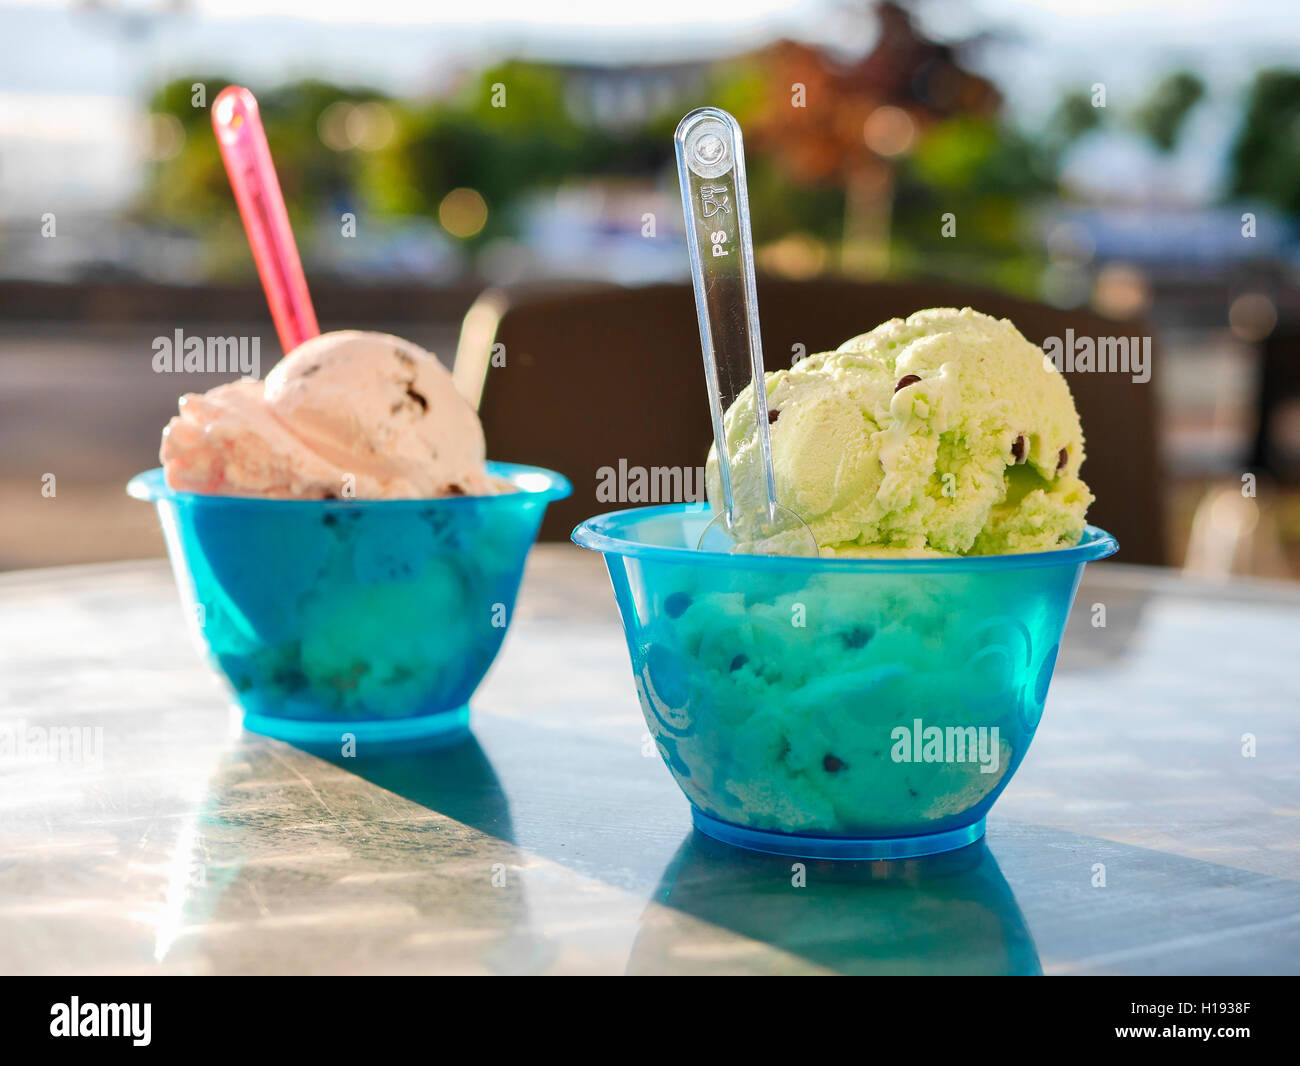 Two small tubs of ice cream sitting on an outside table Stock Photo